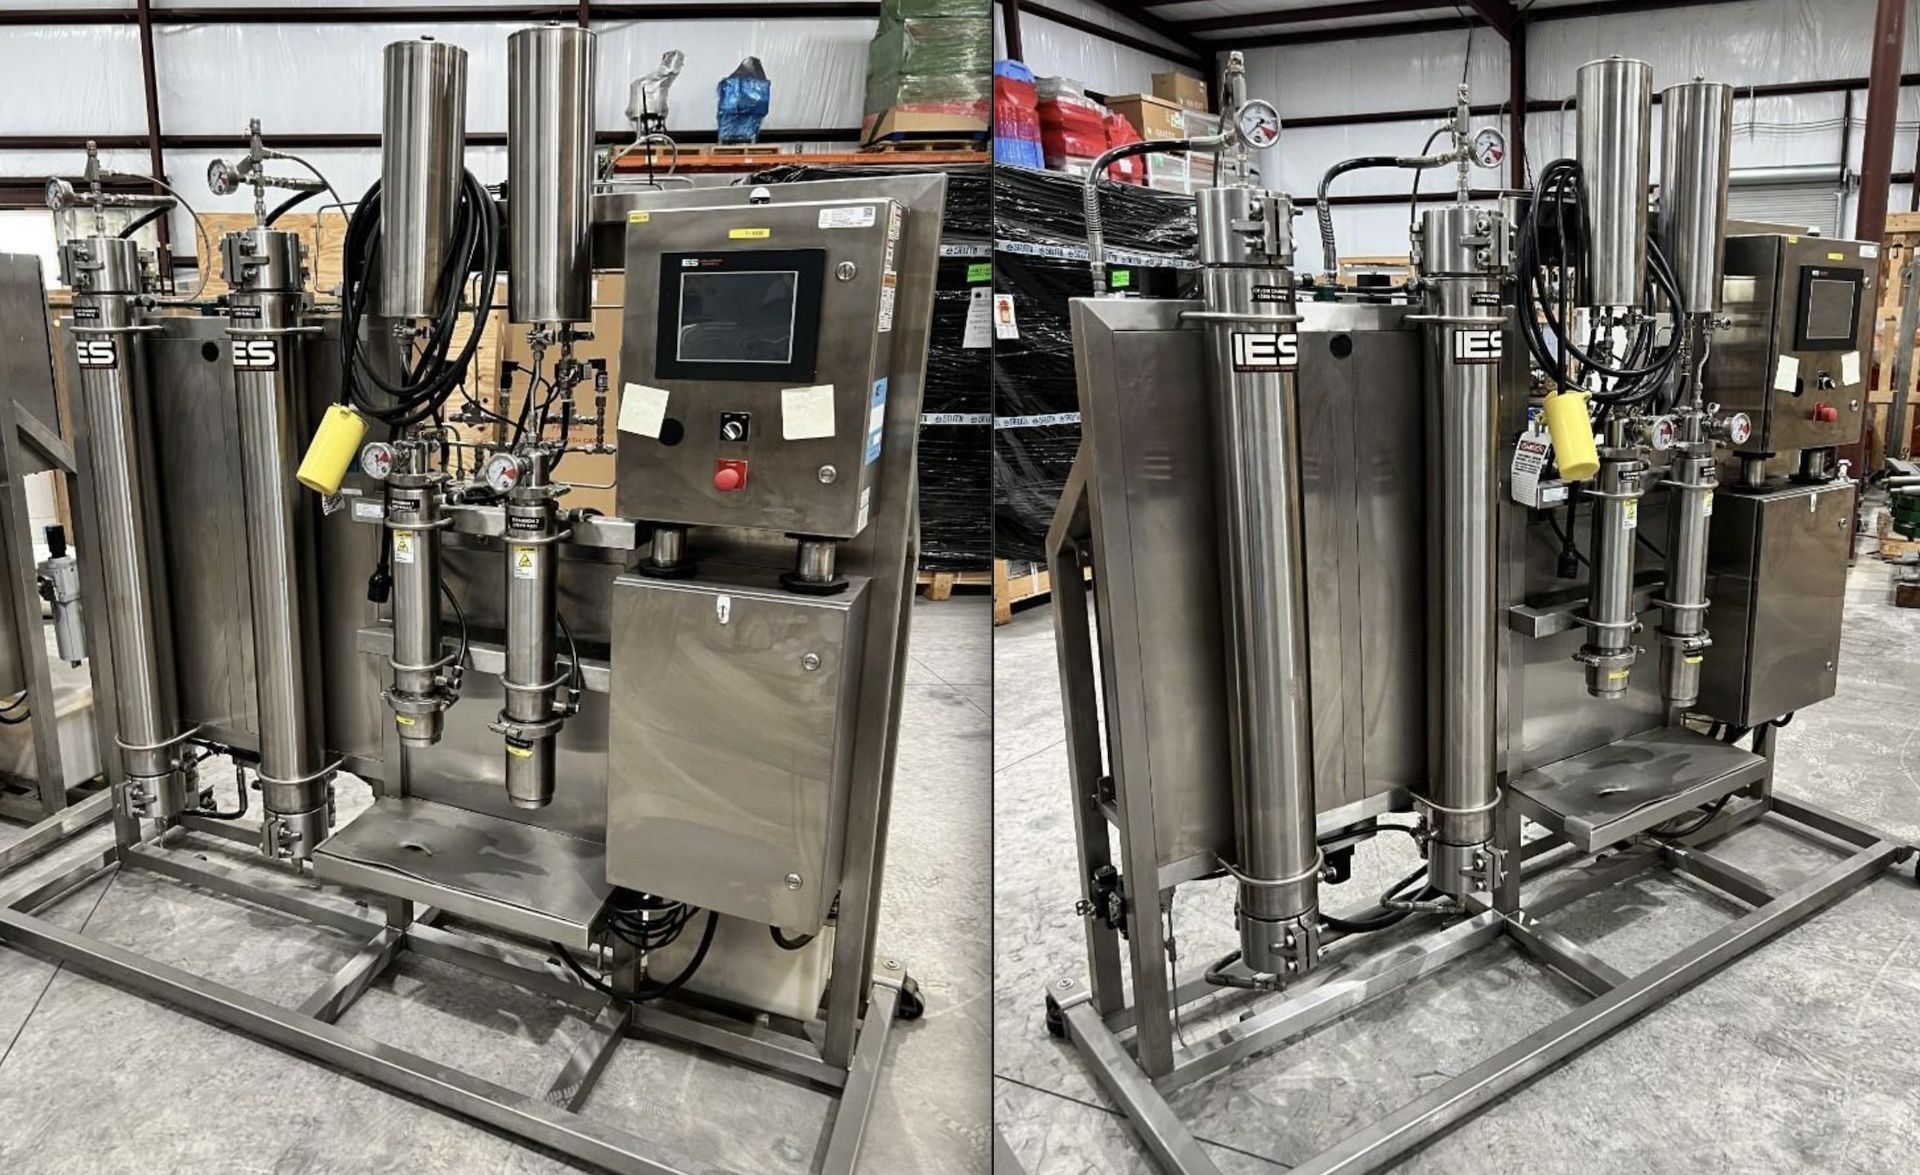 Lot of (2) Used IES 10-2x-2f Closed Loop Supercritical CO2 Extractor Systems. Model CDMH.10-2x-2f